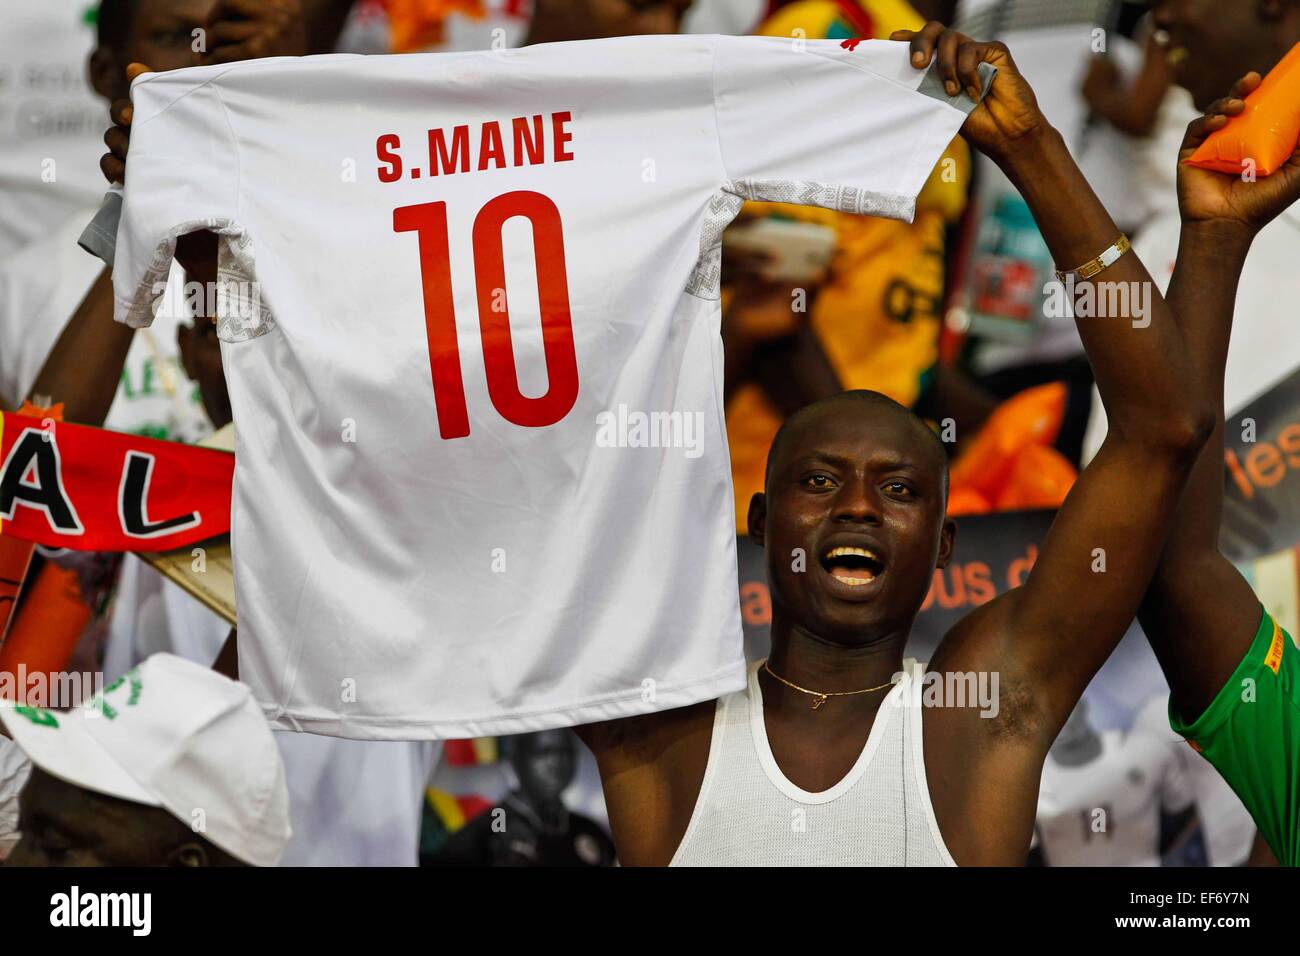 Malabo, Equatorial Guinea. 27th Jan, 2015. Football fans of Senegal chant before the group match of Africa Cup of Nations between Senegal and Algeria at the Stadium of Malabo, Equatorial Guinea, Jan. 27, 2015. Credit:  Li Jing/Xinhua/Alamy Live News Stock Photo